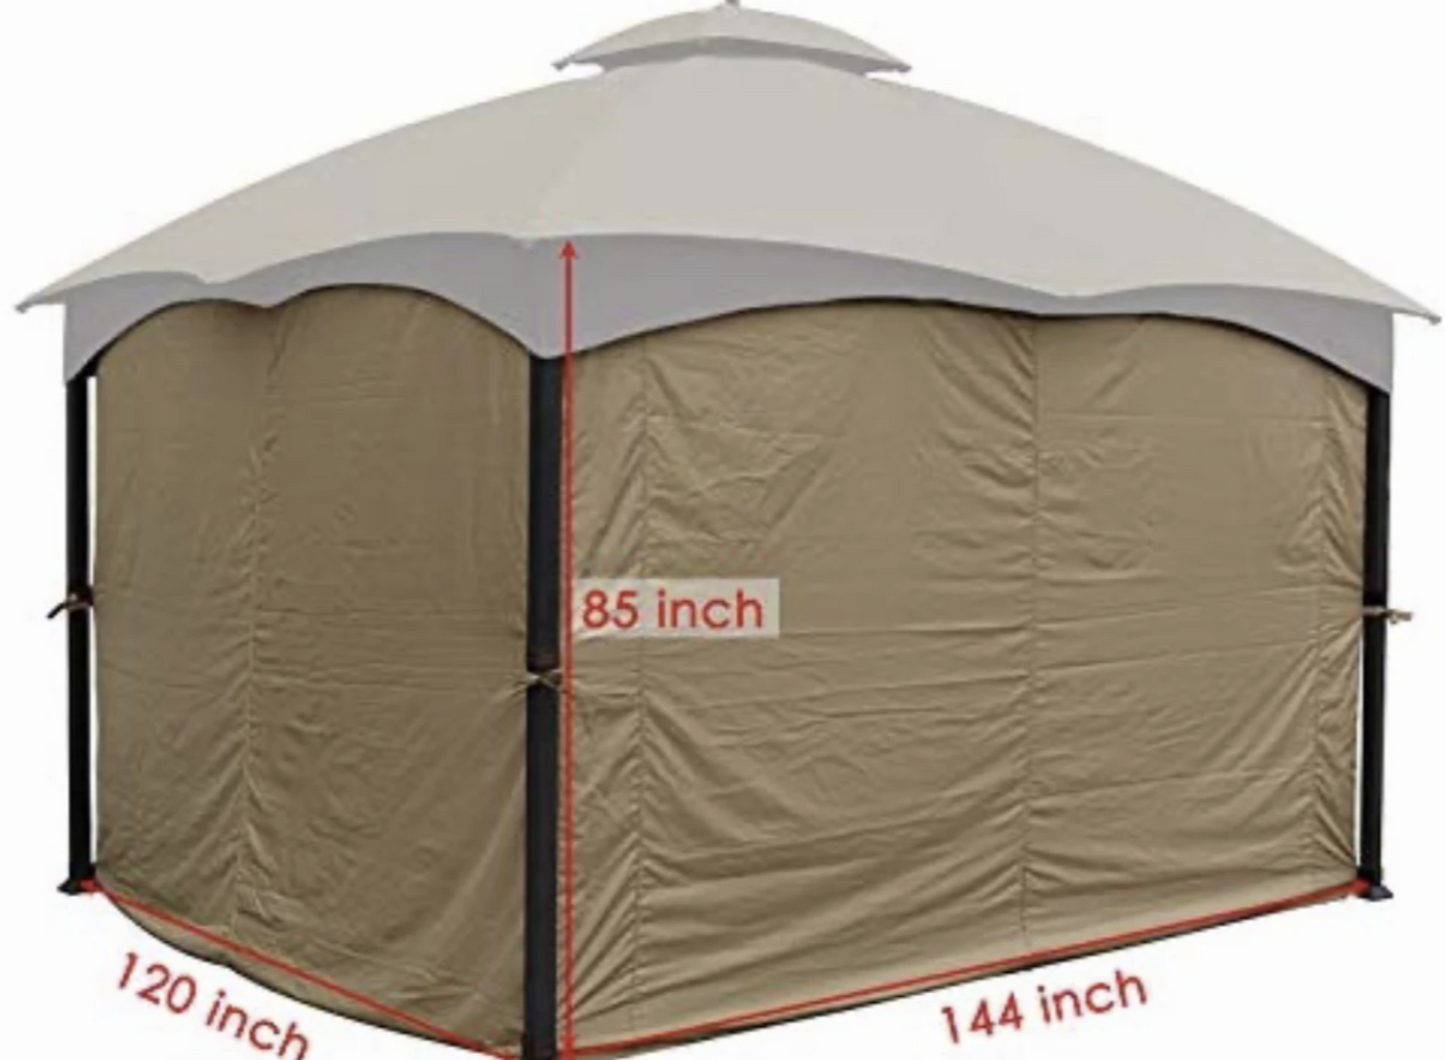 Lowes 10 X 12 TPGAZ2303 A/B/C REFRESH BUNDLE CANOPY,BUG SCREEN,CURTAIN ALL IN ONE PACKAGE